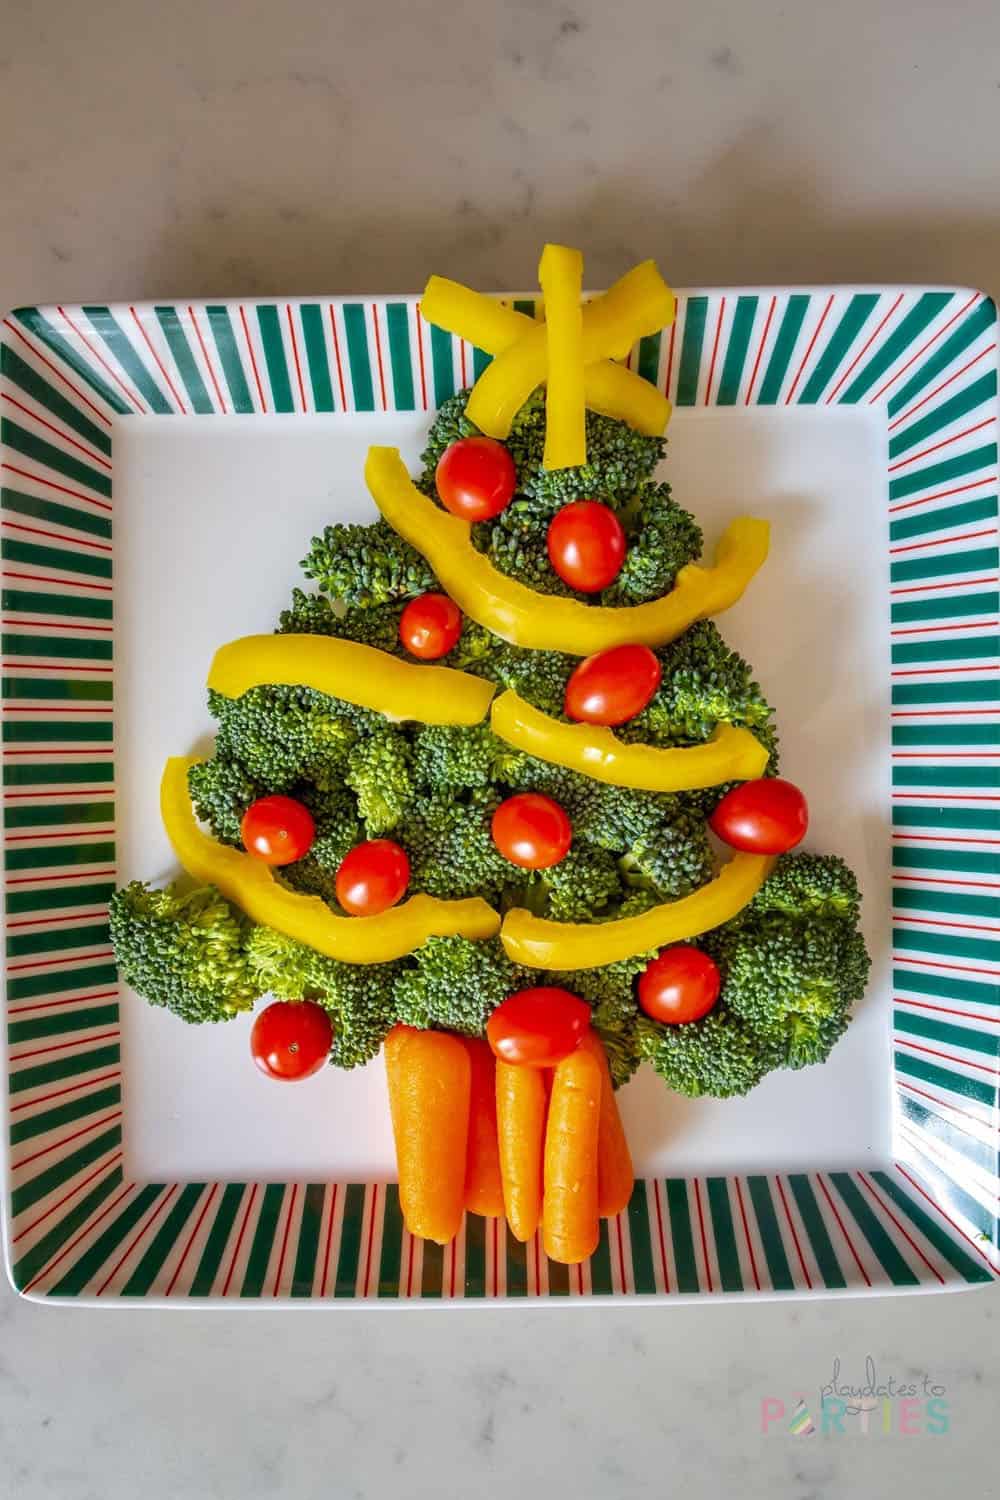 Veggies in the shape of a Christmas tree with broccoli, carrots, tomatoes, and bell pepper strips.